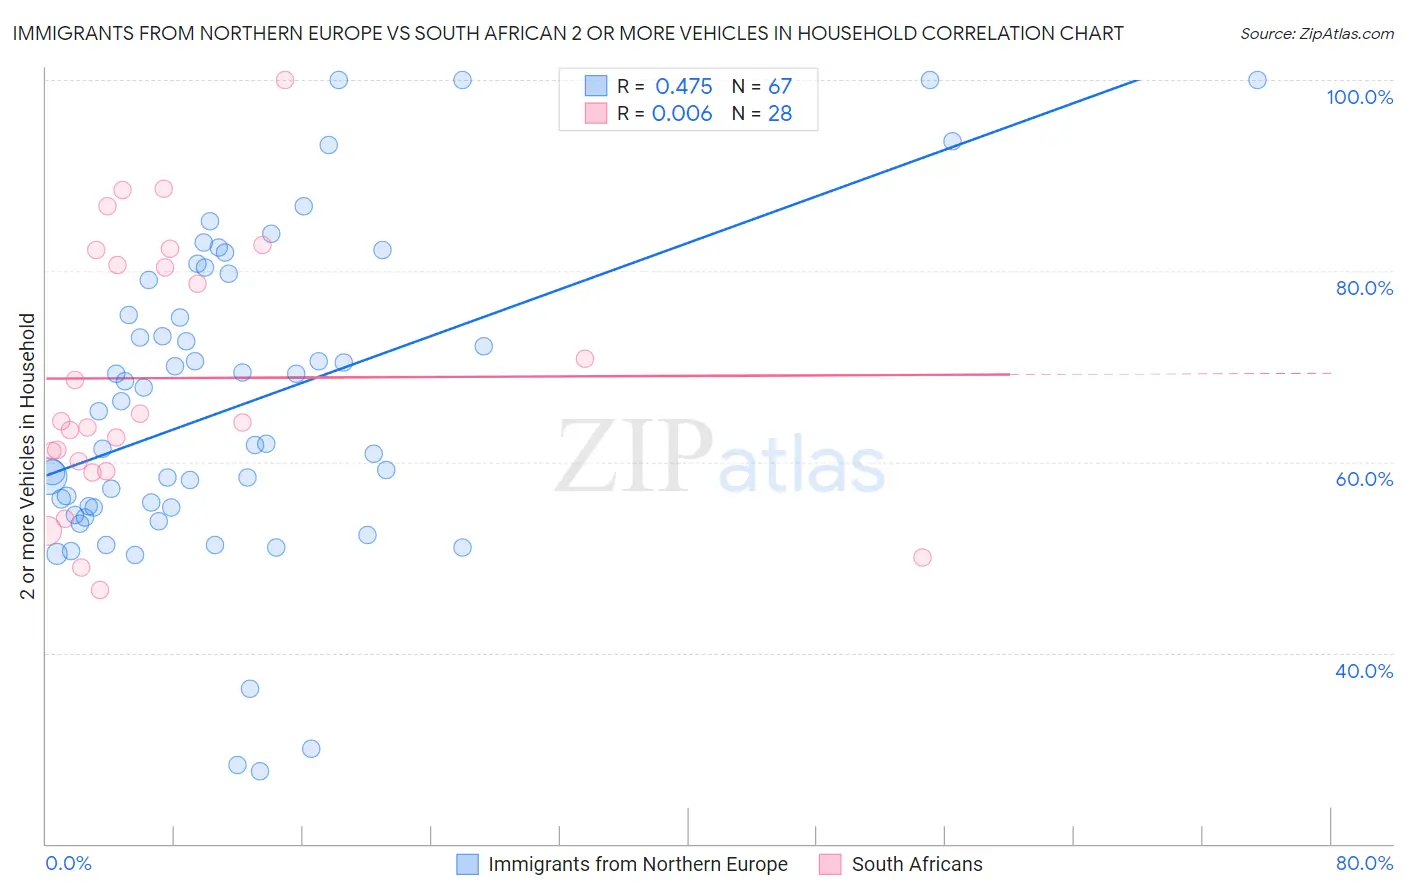 Immigrants from Northern Europe vs South African 2 or more Vehicles in Household